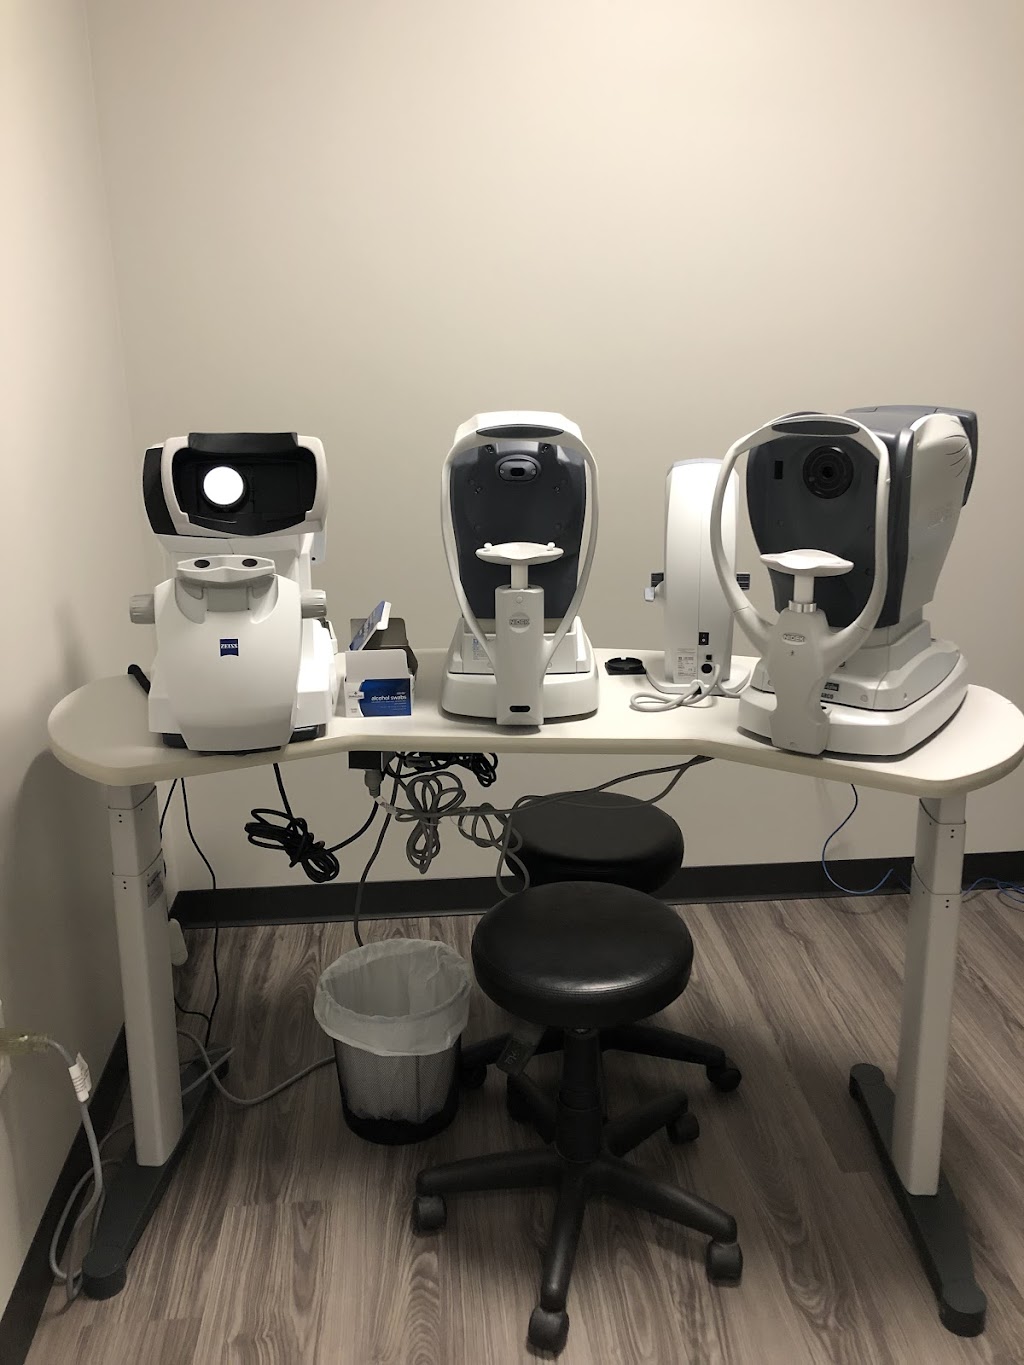 Round Rock - Clearly Eye Care | 1900 University Blvd Suite 200, Round Rock, TX 78665, USA | Phone: (512) 337-4078